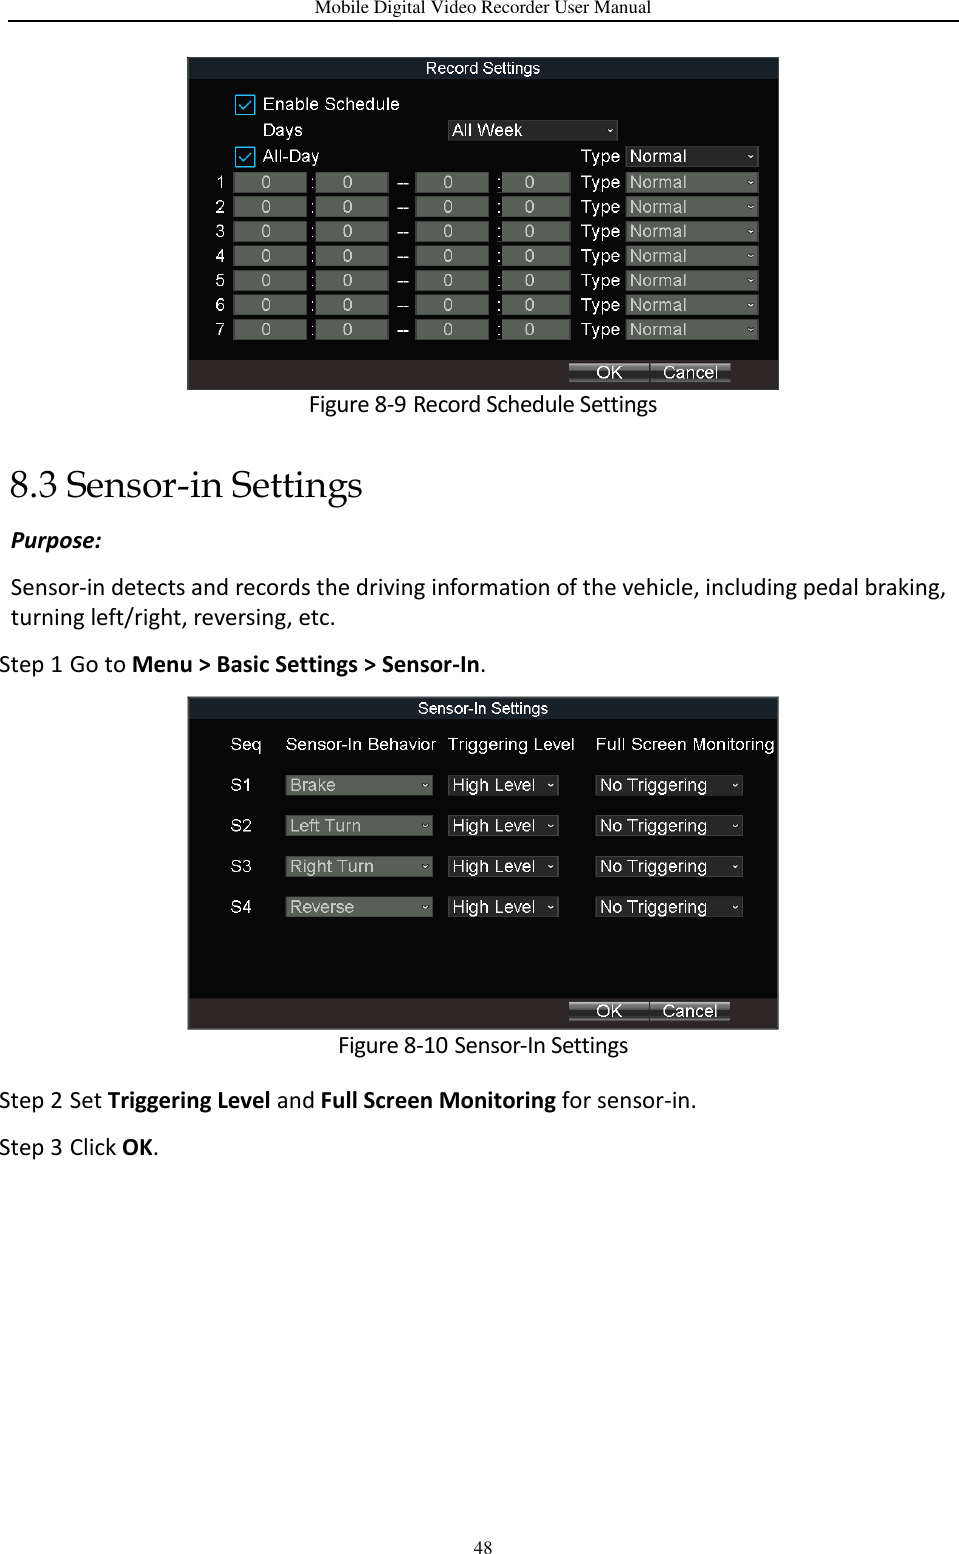 Mobile Digital Video Recorder User Manual 48  Figure 8-9 Record Schedule Settings 8.3 Sensor-in Settings Purpose: Sensor-in detects and records the driving information of the vehicle, including pedal braking, turning left/right, reversing, etc. Step 1 Go to Menu &gt; Basic Settings &gt; Sensor-In.  Figure 8-10 Sensor-In Settings Step 2 Set Triggering Level and Full Screen Monitoring for sensor-in. Step 3 Click OK.   